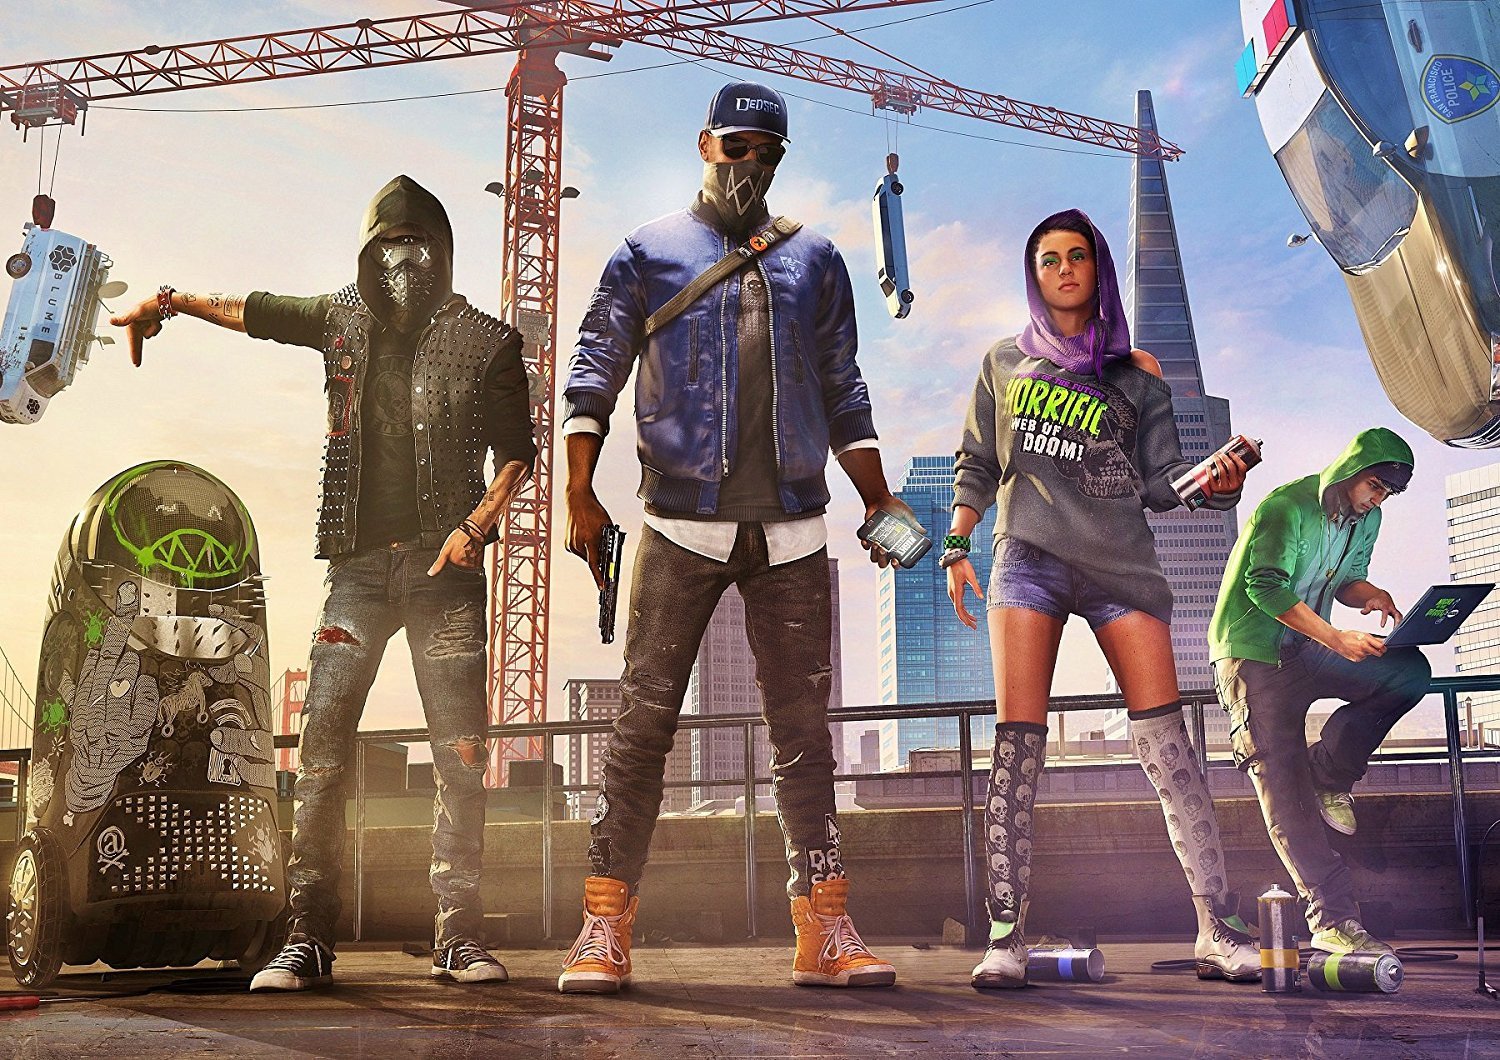 Marcus wearing his usual blue jacket combo with orange high top sneakers, a white belt, deadsec cap, and black face mask. His hacker teammates are standing beside him